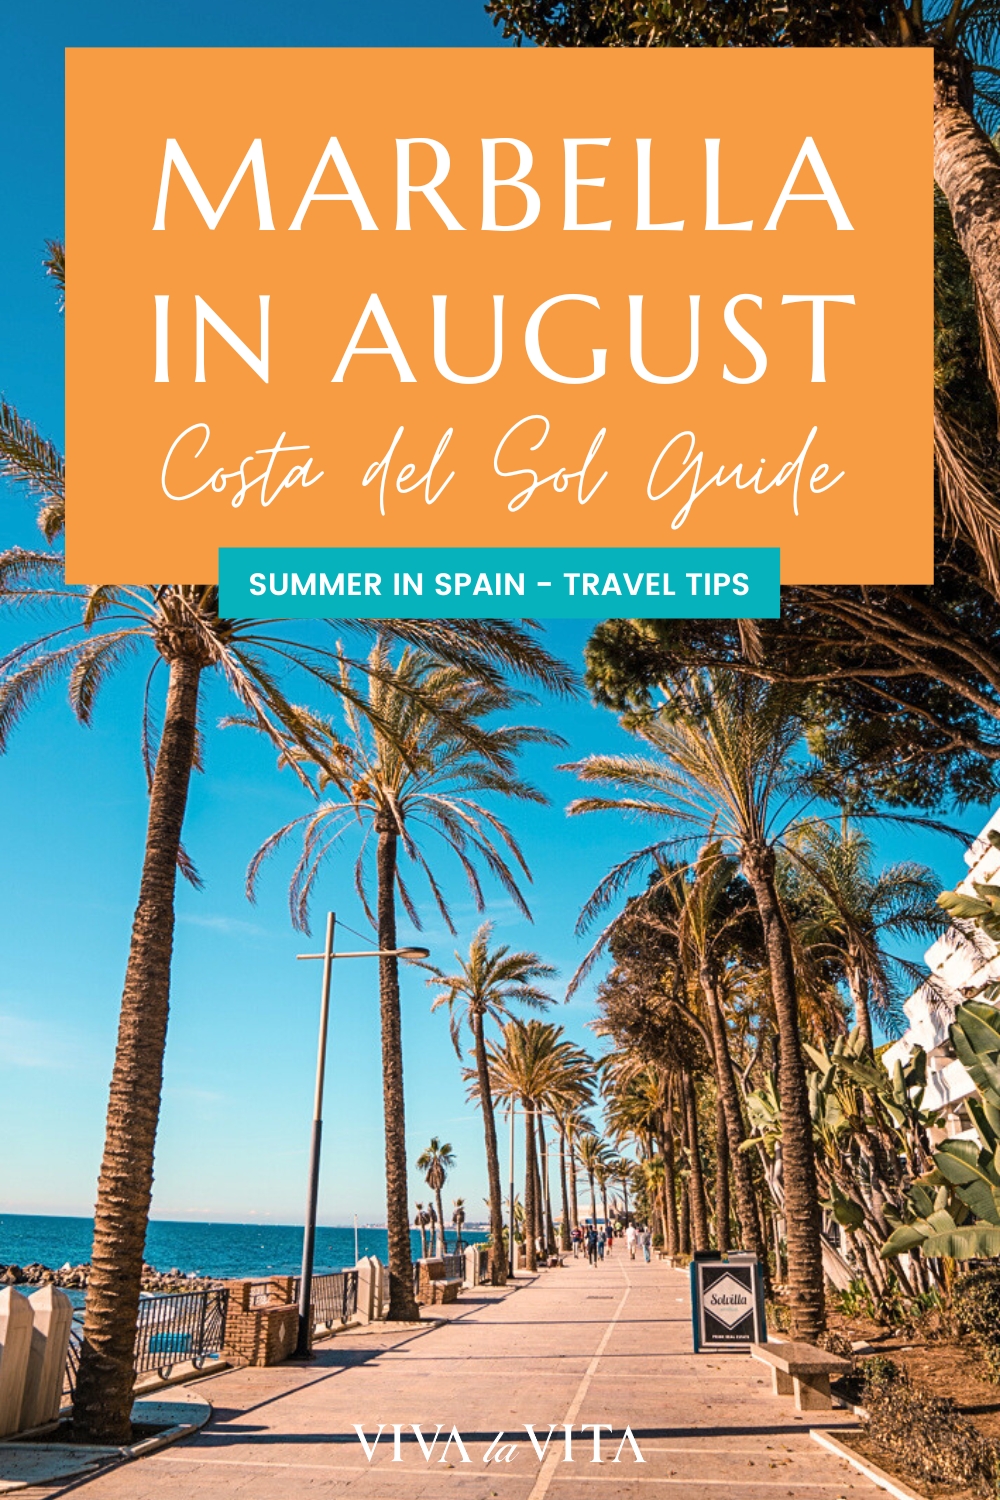 Pinterest image showing a costal promenade with palm trees in Marbella on Costa del Sol with a headline that reads: marbella in August - costa del sol guide, summer in spain - travel tips